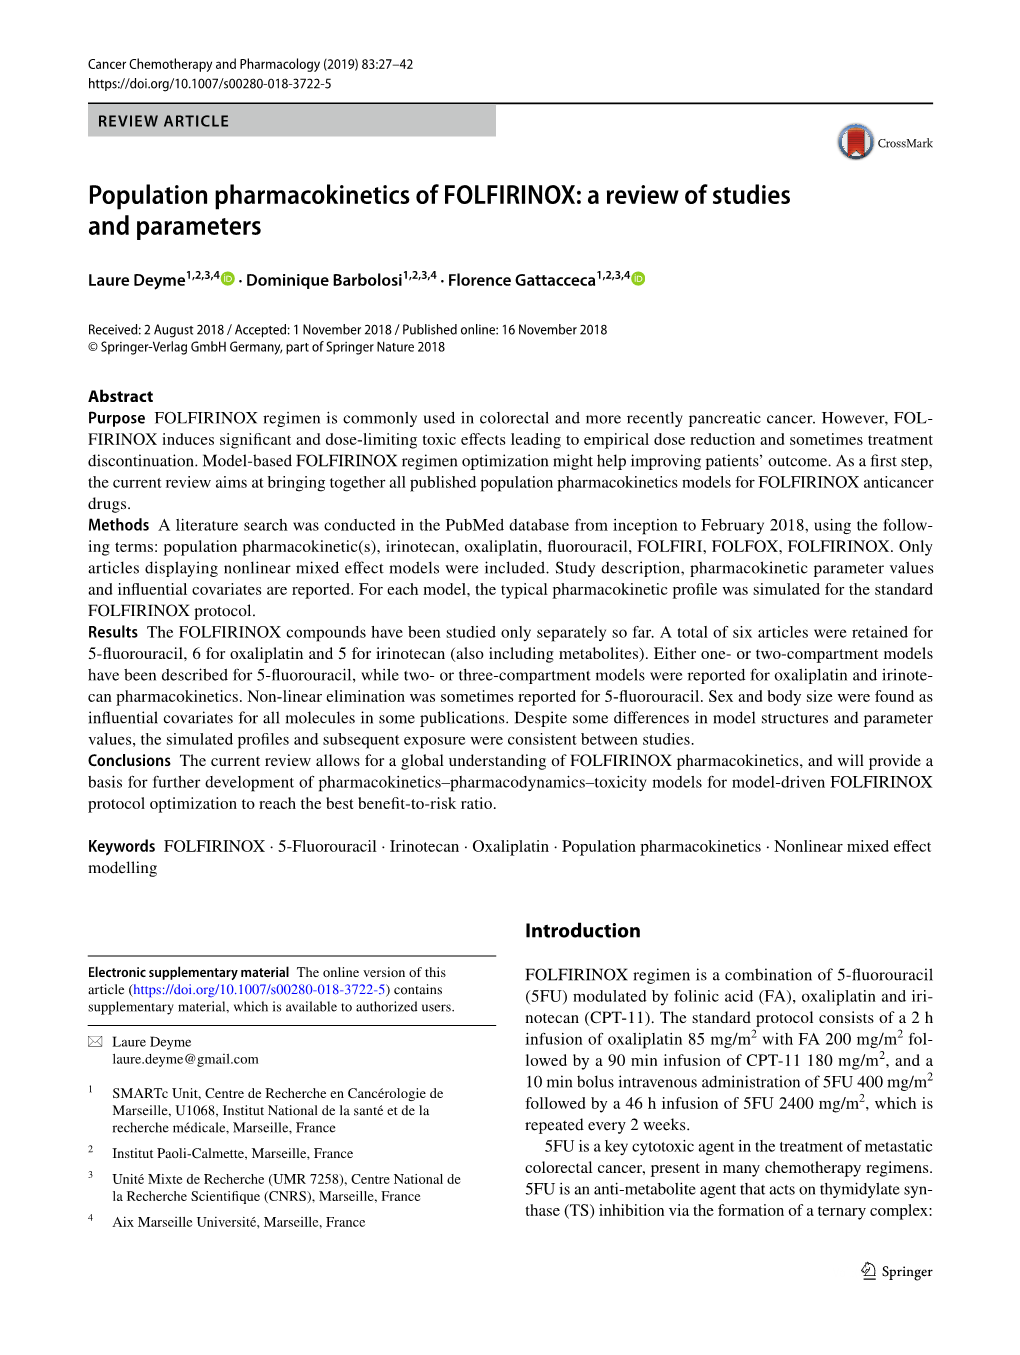 Population Pharmacokinetics of FOLFIRINOX: a Review of Studies and Parameters